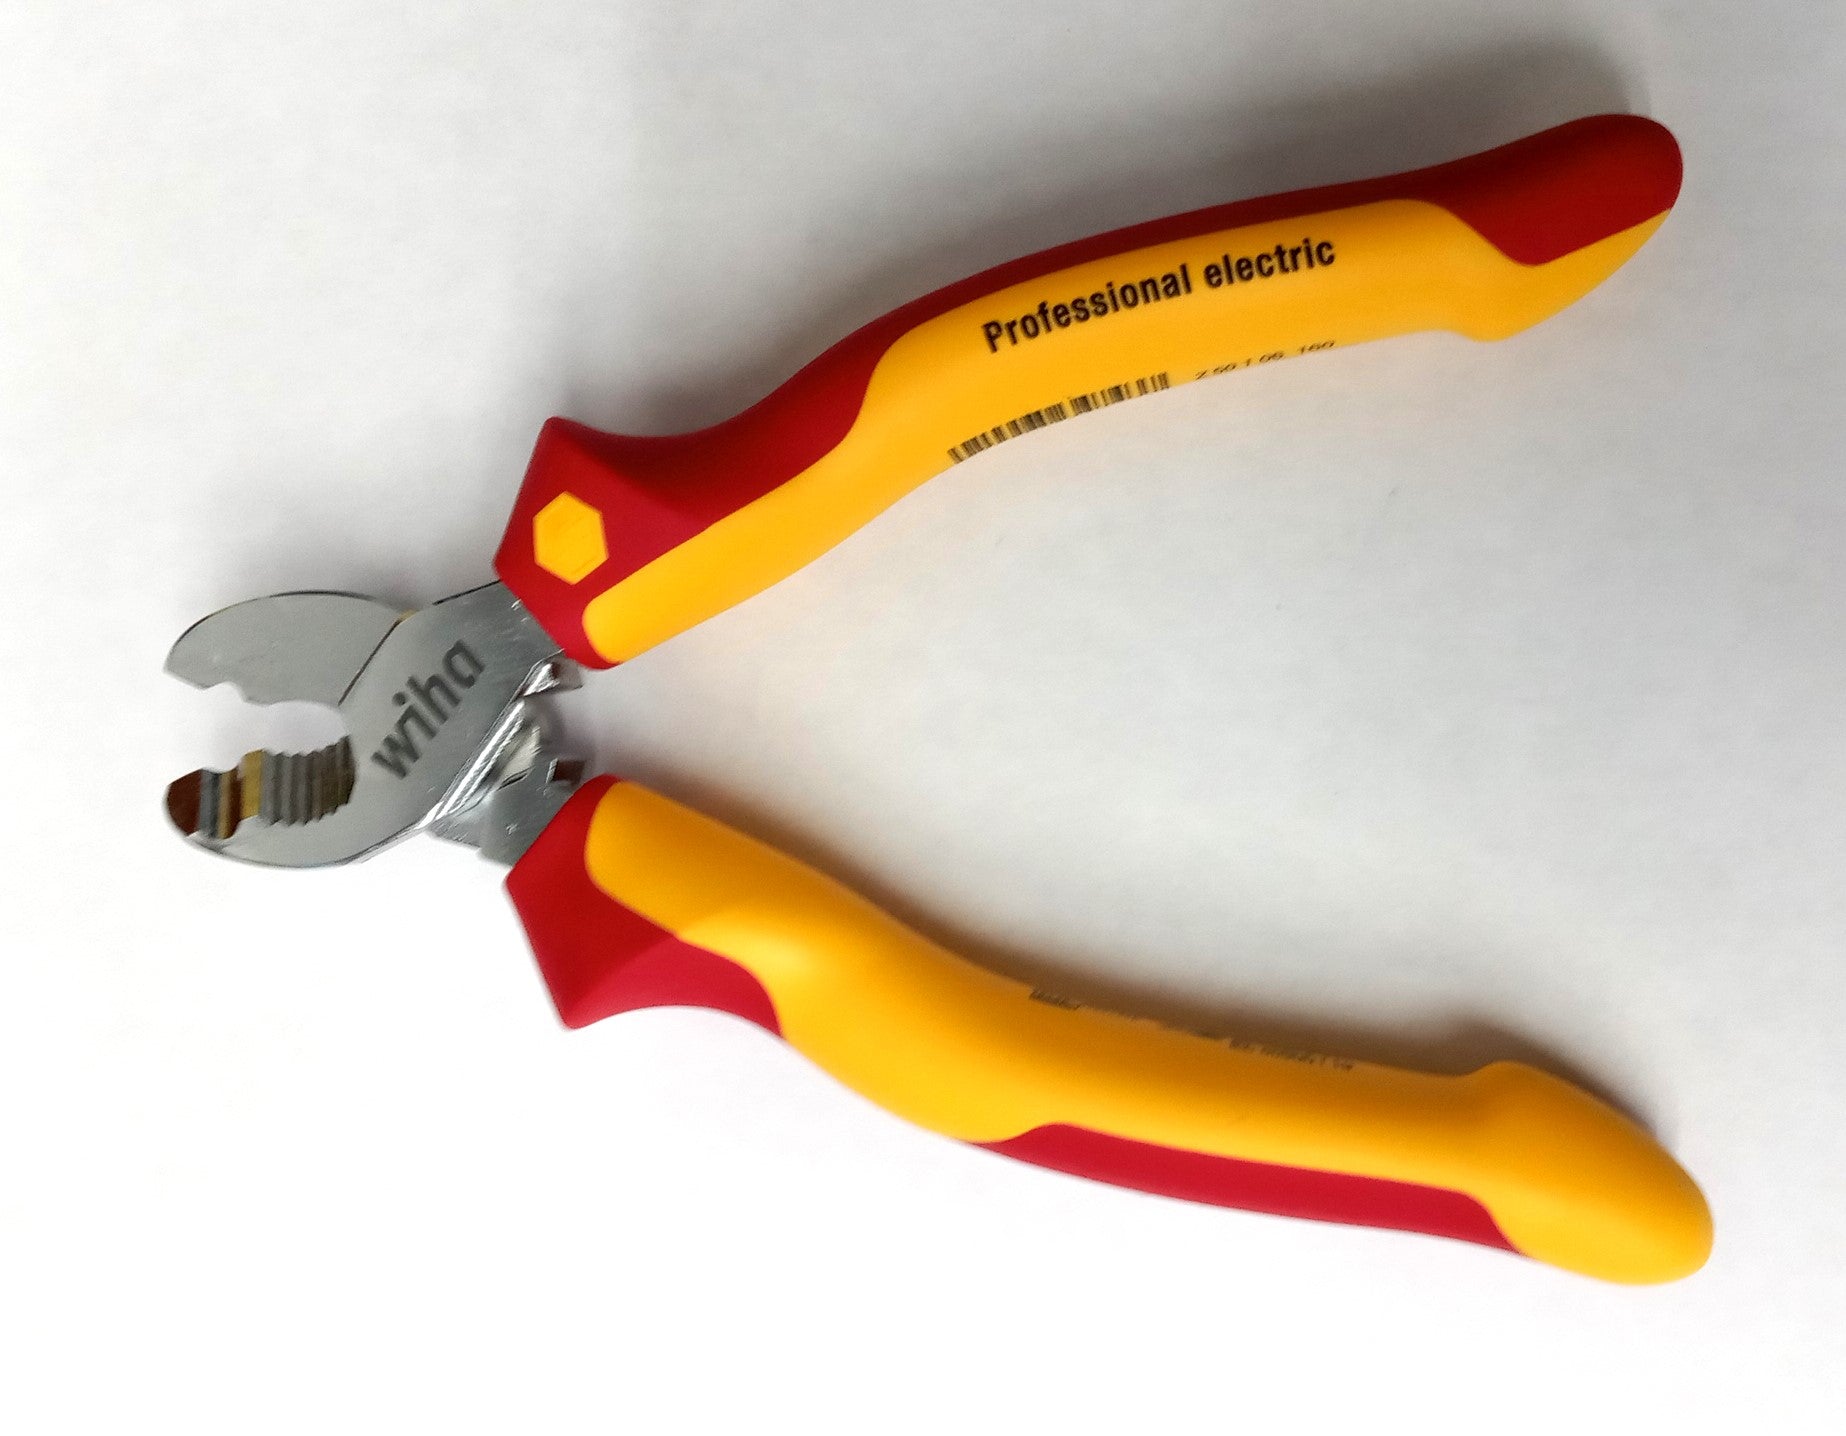 Wiha 32826 Insulated Serrated Edge Cable Cutters 6.3" Germany